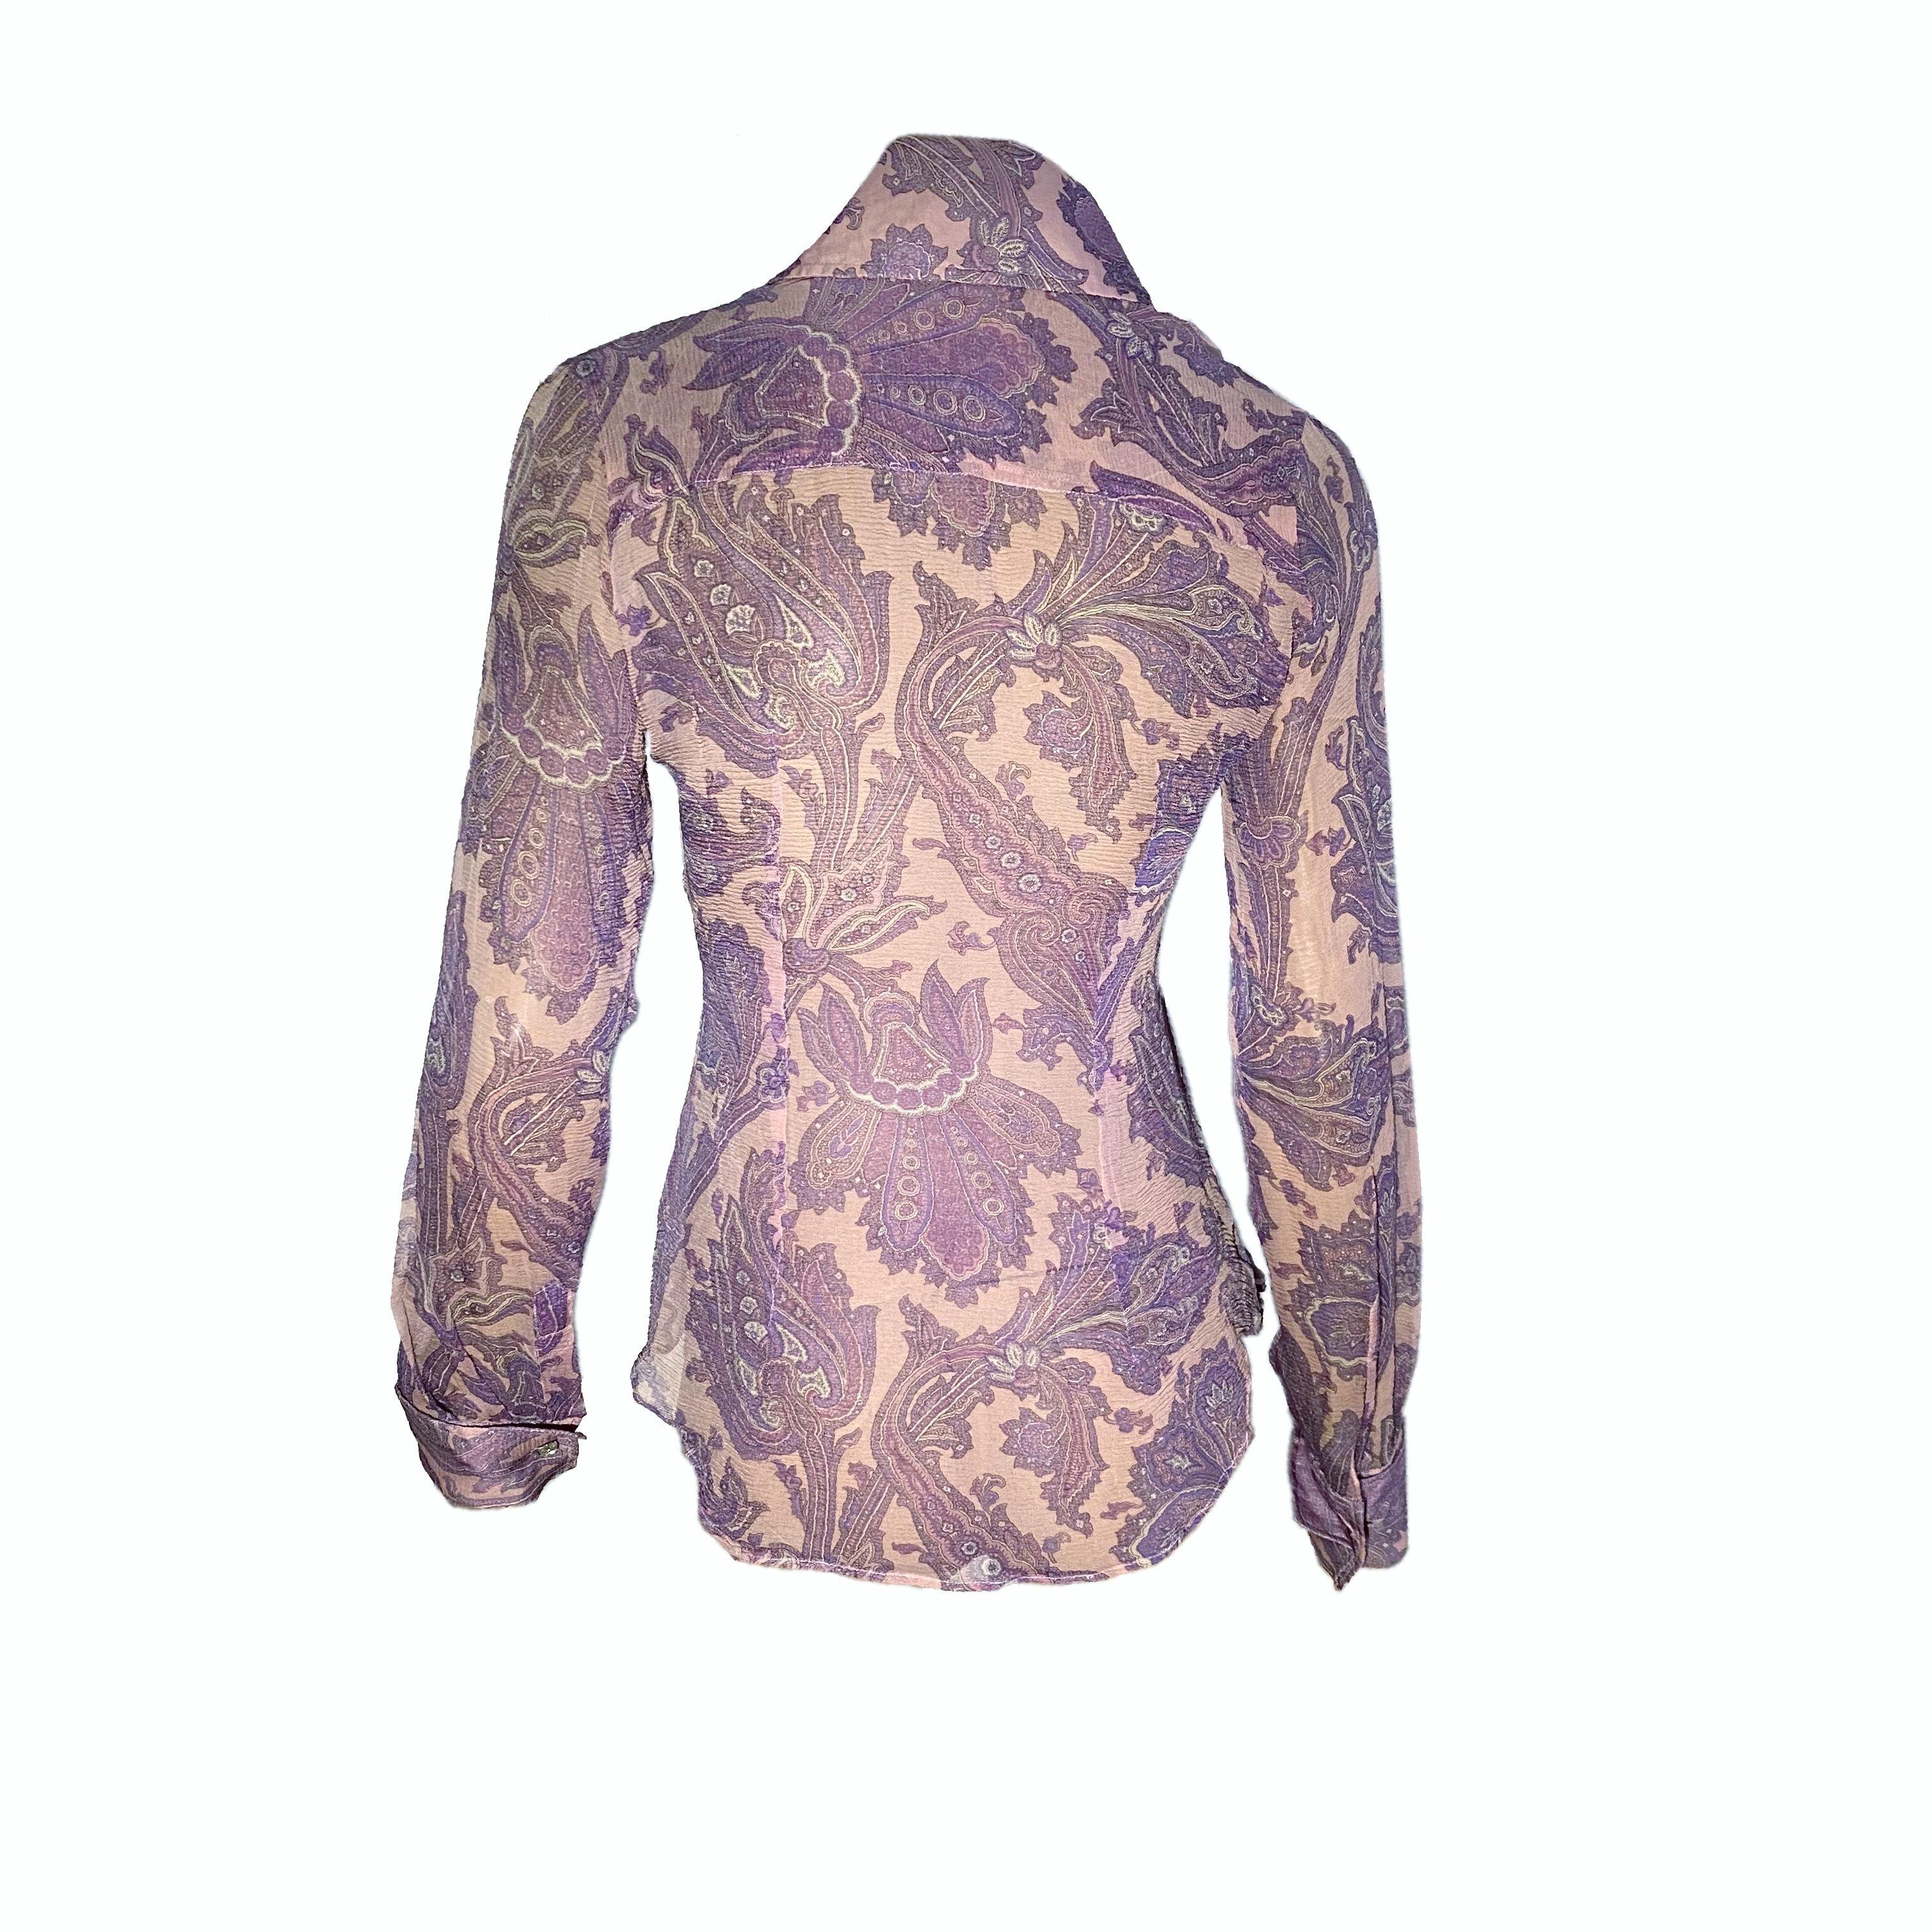 Dolce & Gabbana sheer low-cut shirt from the S/S 2000 “Mix & Match” collection, also appeared on the runway (Look 32, worn by Trish Goff)

Pink and purple Paisley motif, crystal cufflinks

Size IT 40

Shoulder to shoulder: 40cm / 15,7 inches 
Pit to